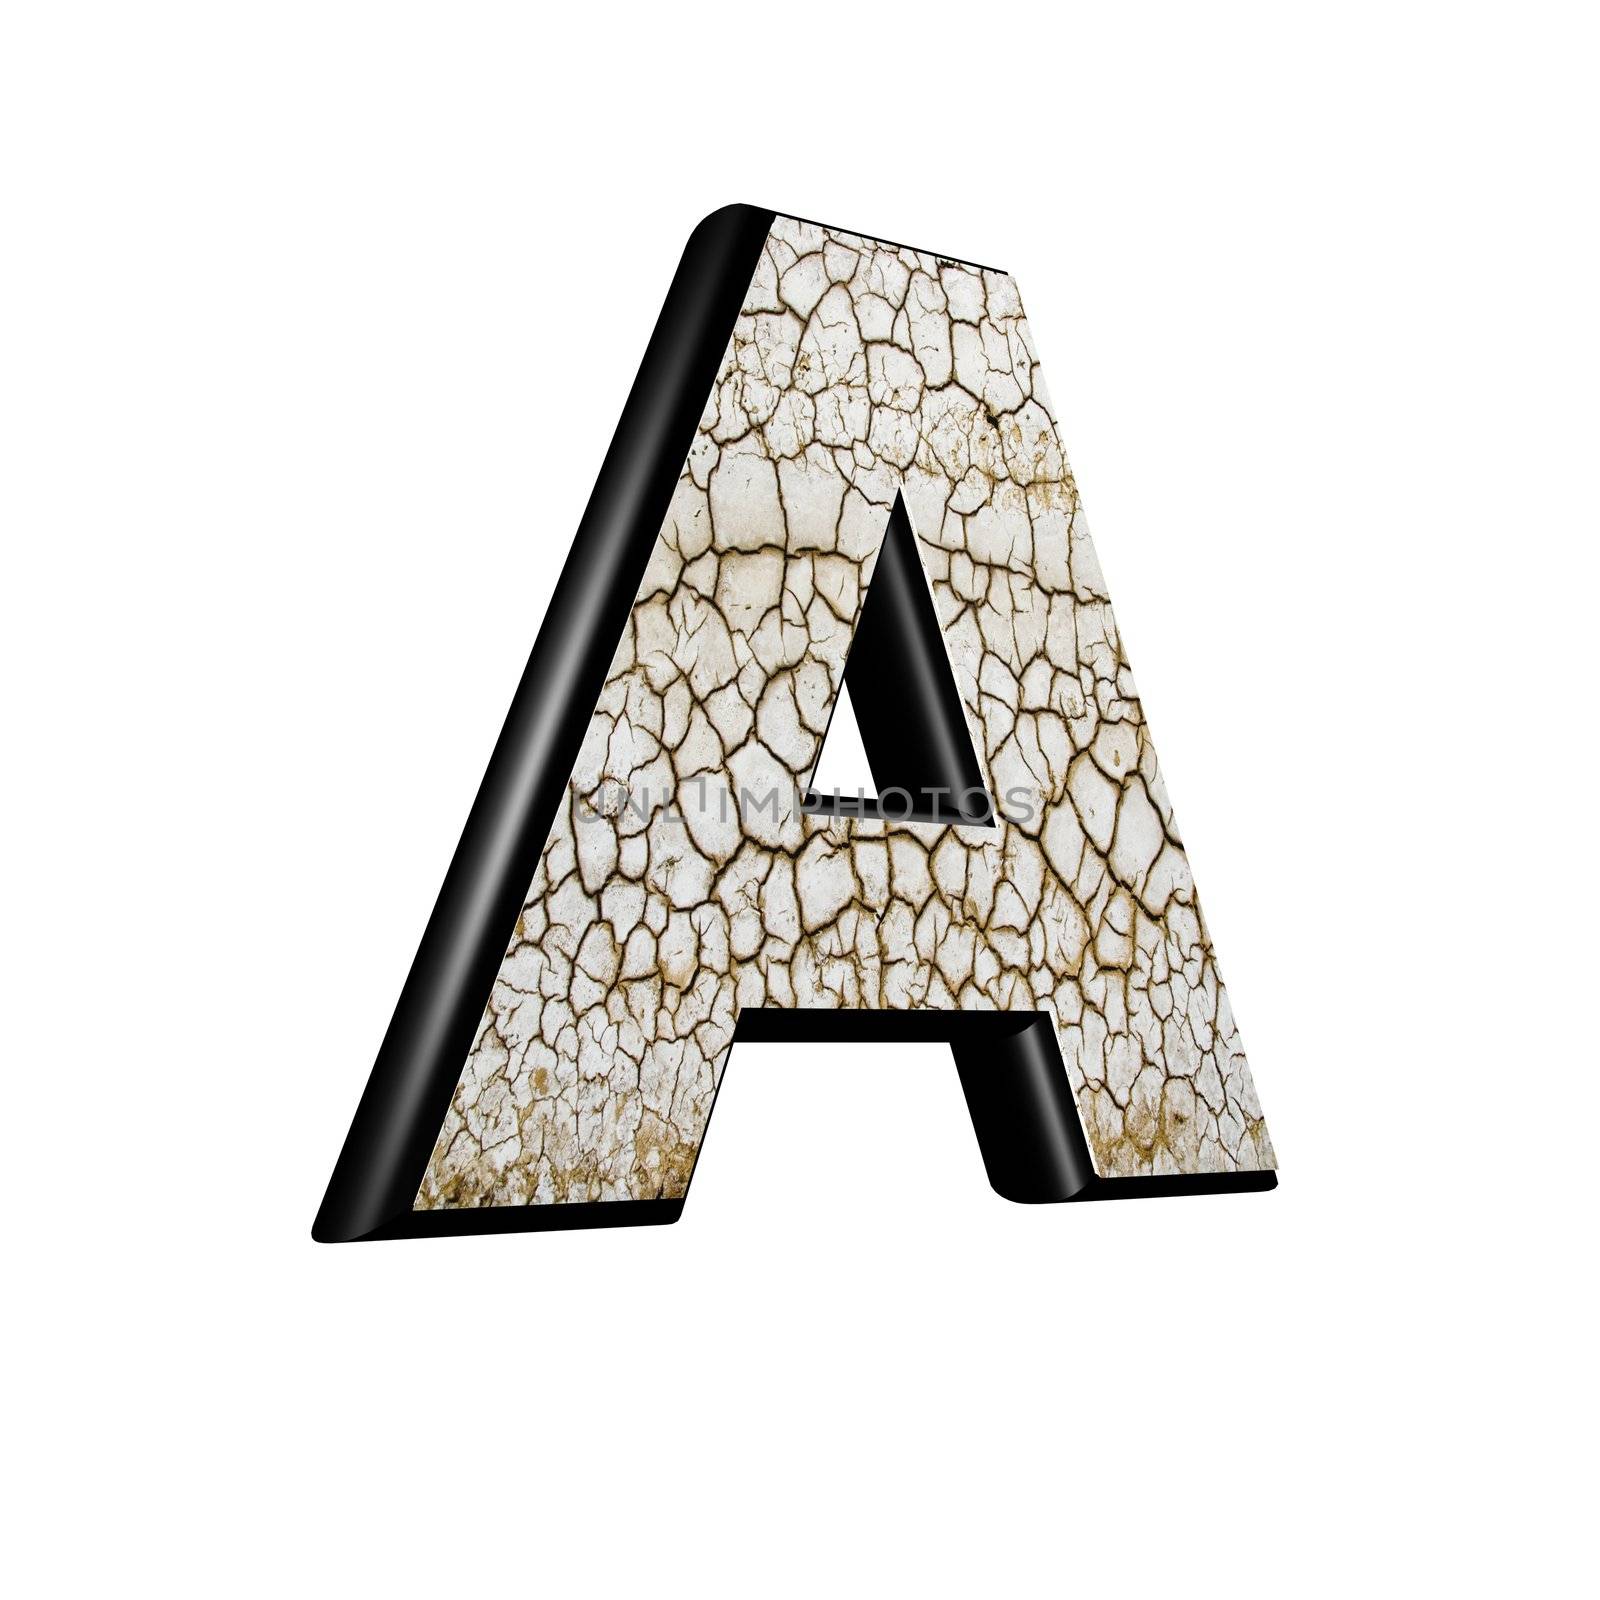 abstract 3d letter with dry ground texture - A by chrisroll